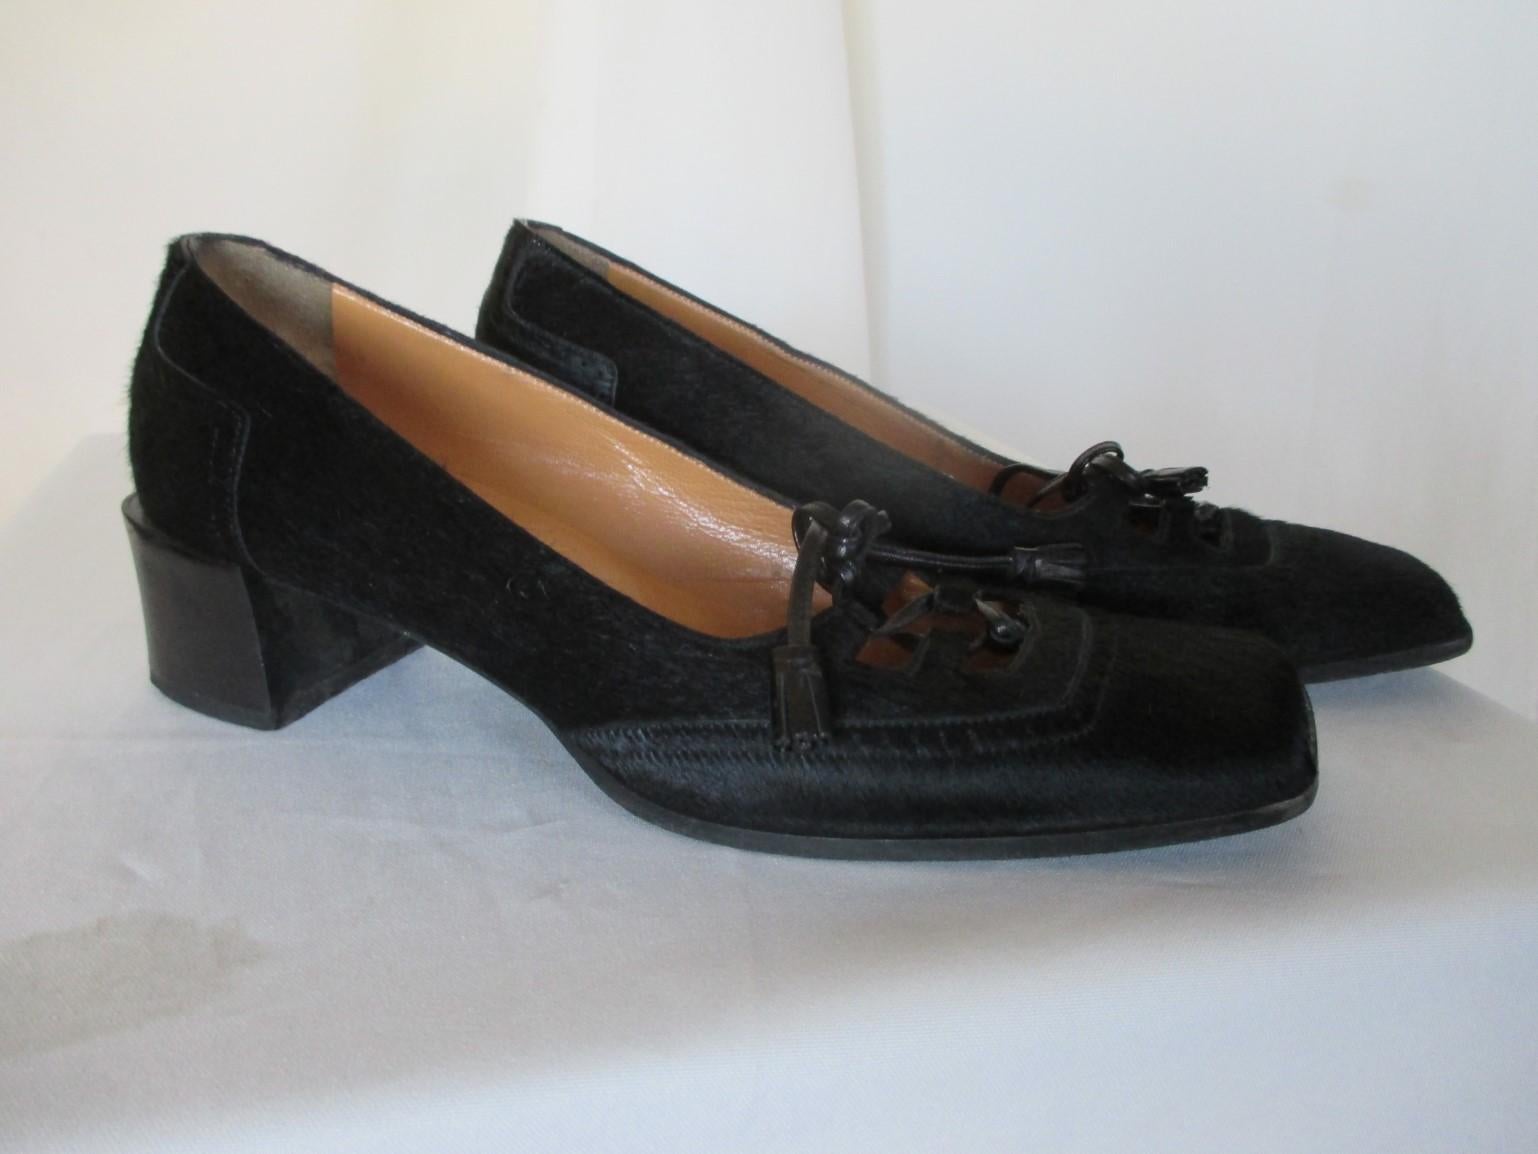 These shoes are made from black calf/pony skin leather by the house of Hermes.
The lining is made of very soft leather.
The heel is aprox. 4.5 cm/ 1.77 high
In pre-loved condition.
size EU 36.5

Please note that vintage items are not new and